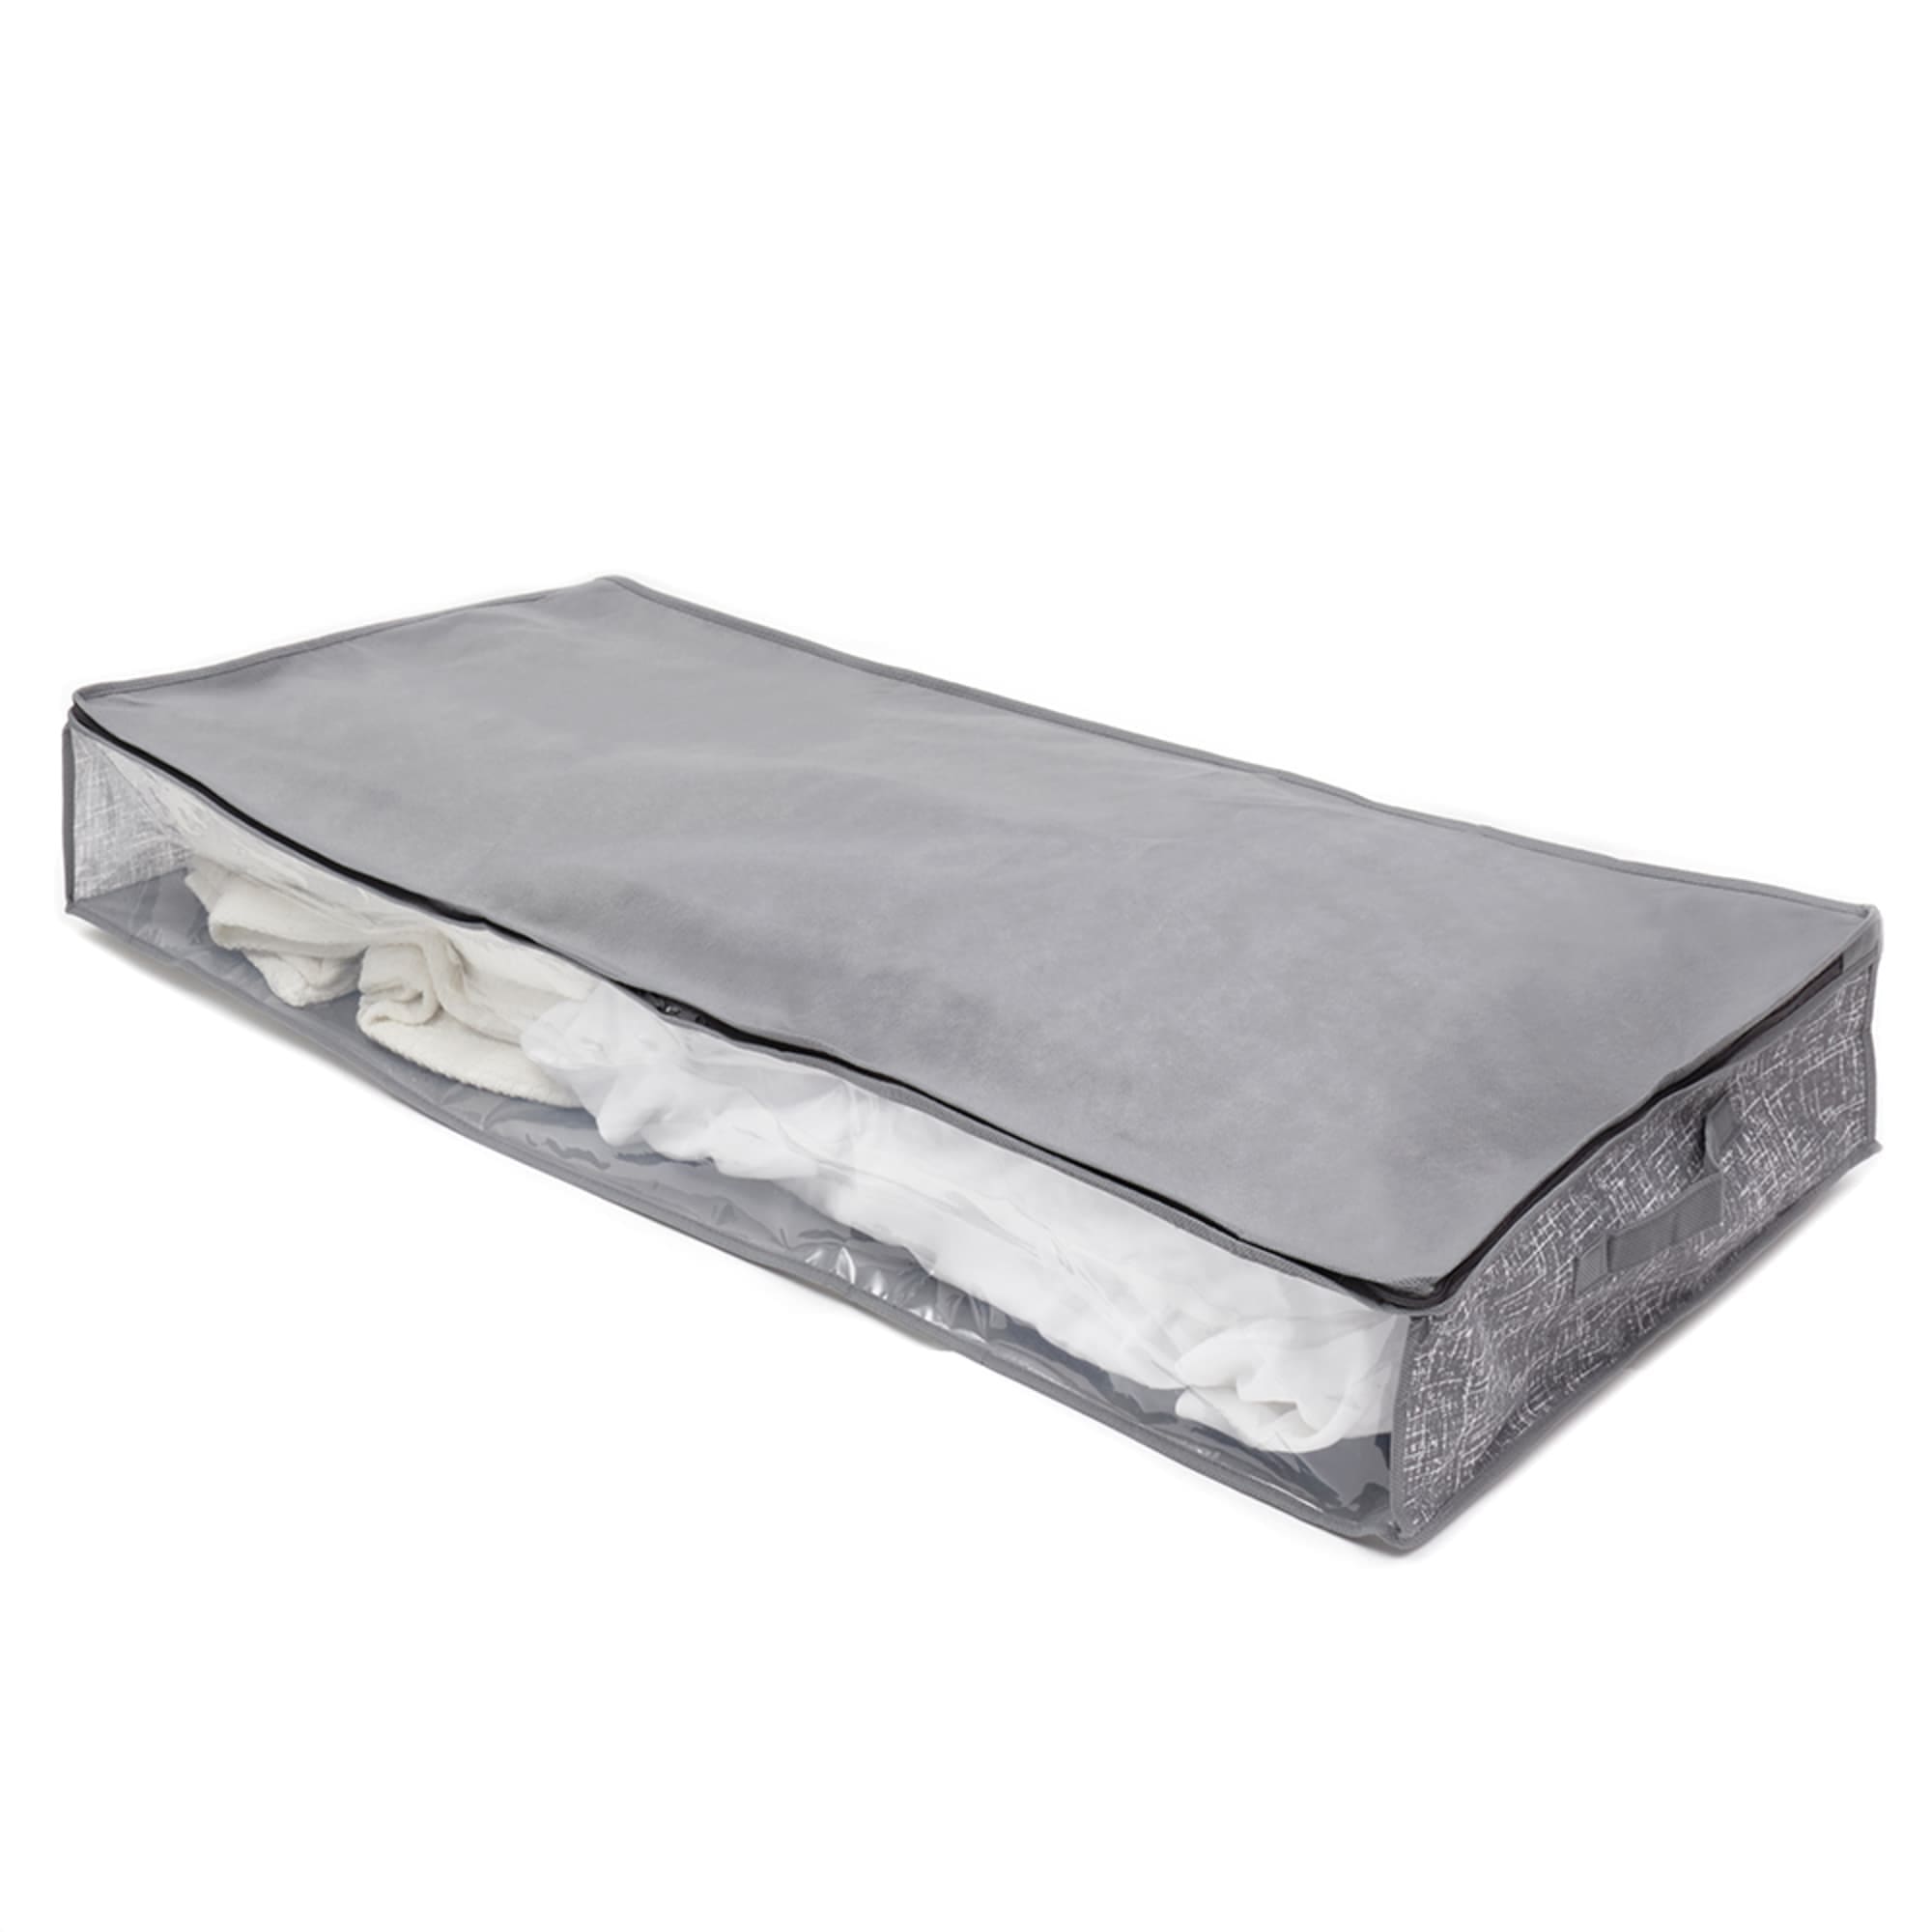 Home Basics Graph Line Non-Woven Under the Bed Storage Bag, Grey $4.00 EACH, CASE PACK OF 12